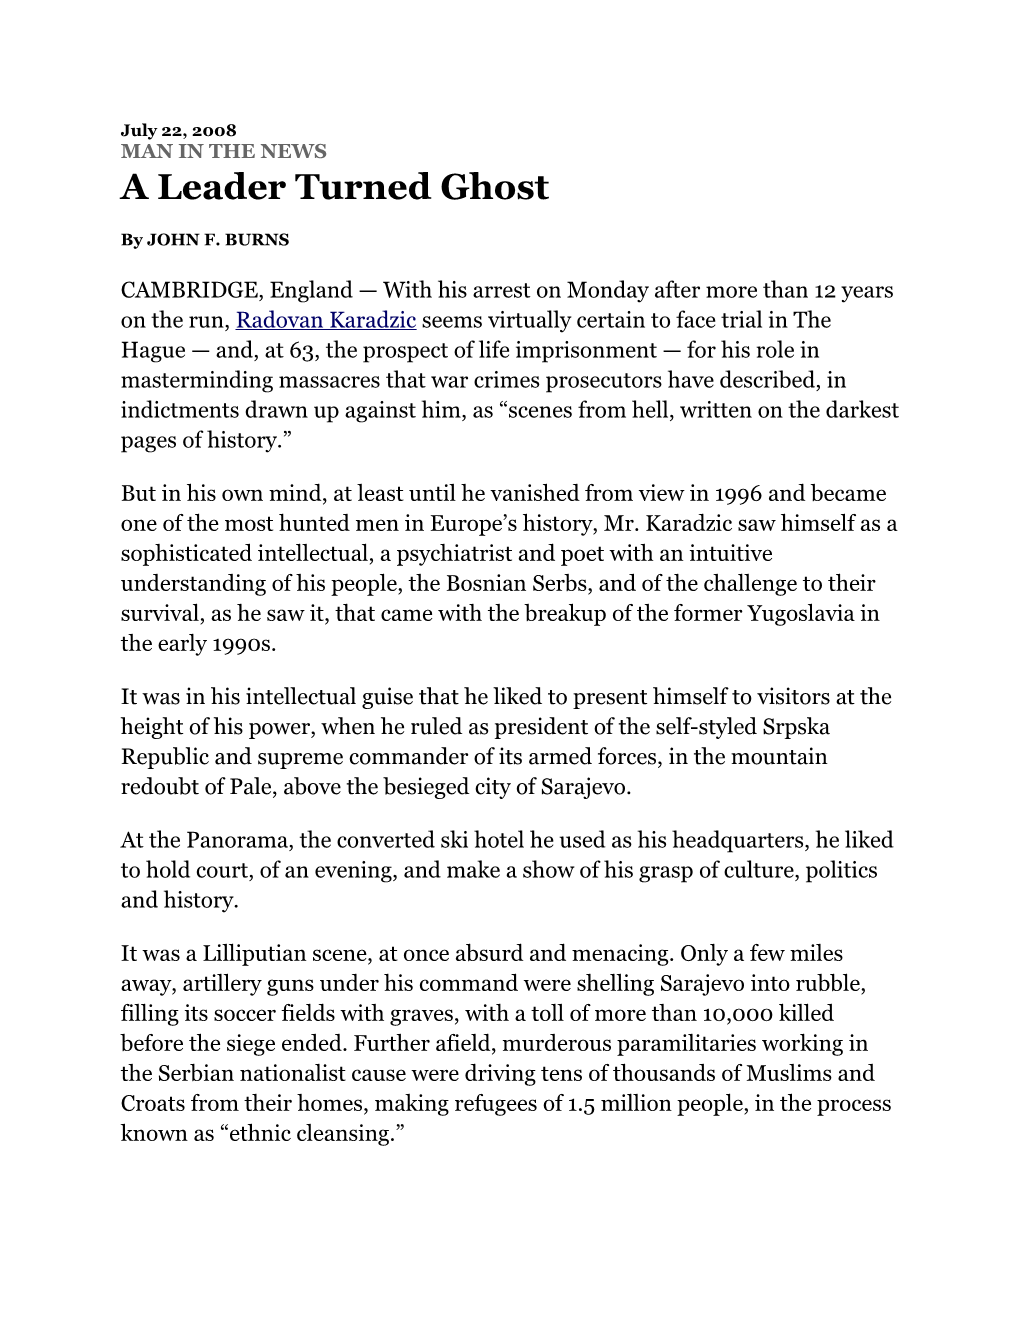 A Leader Turned Ghost